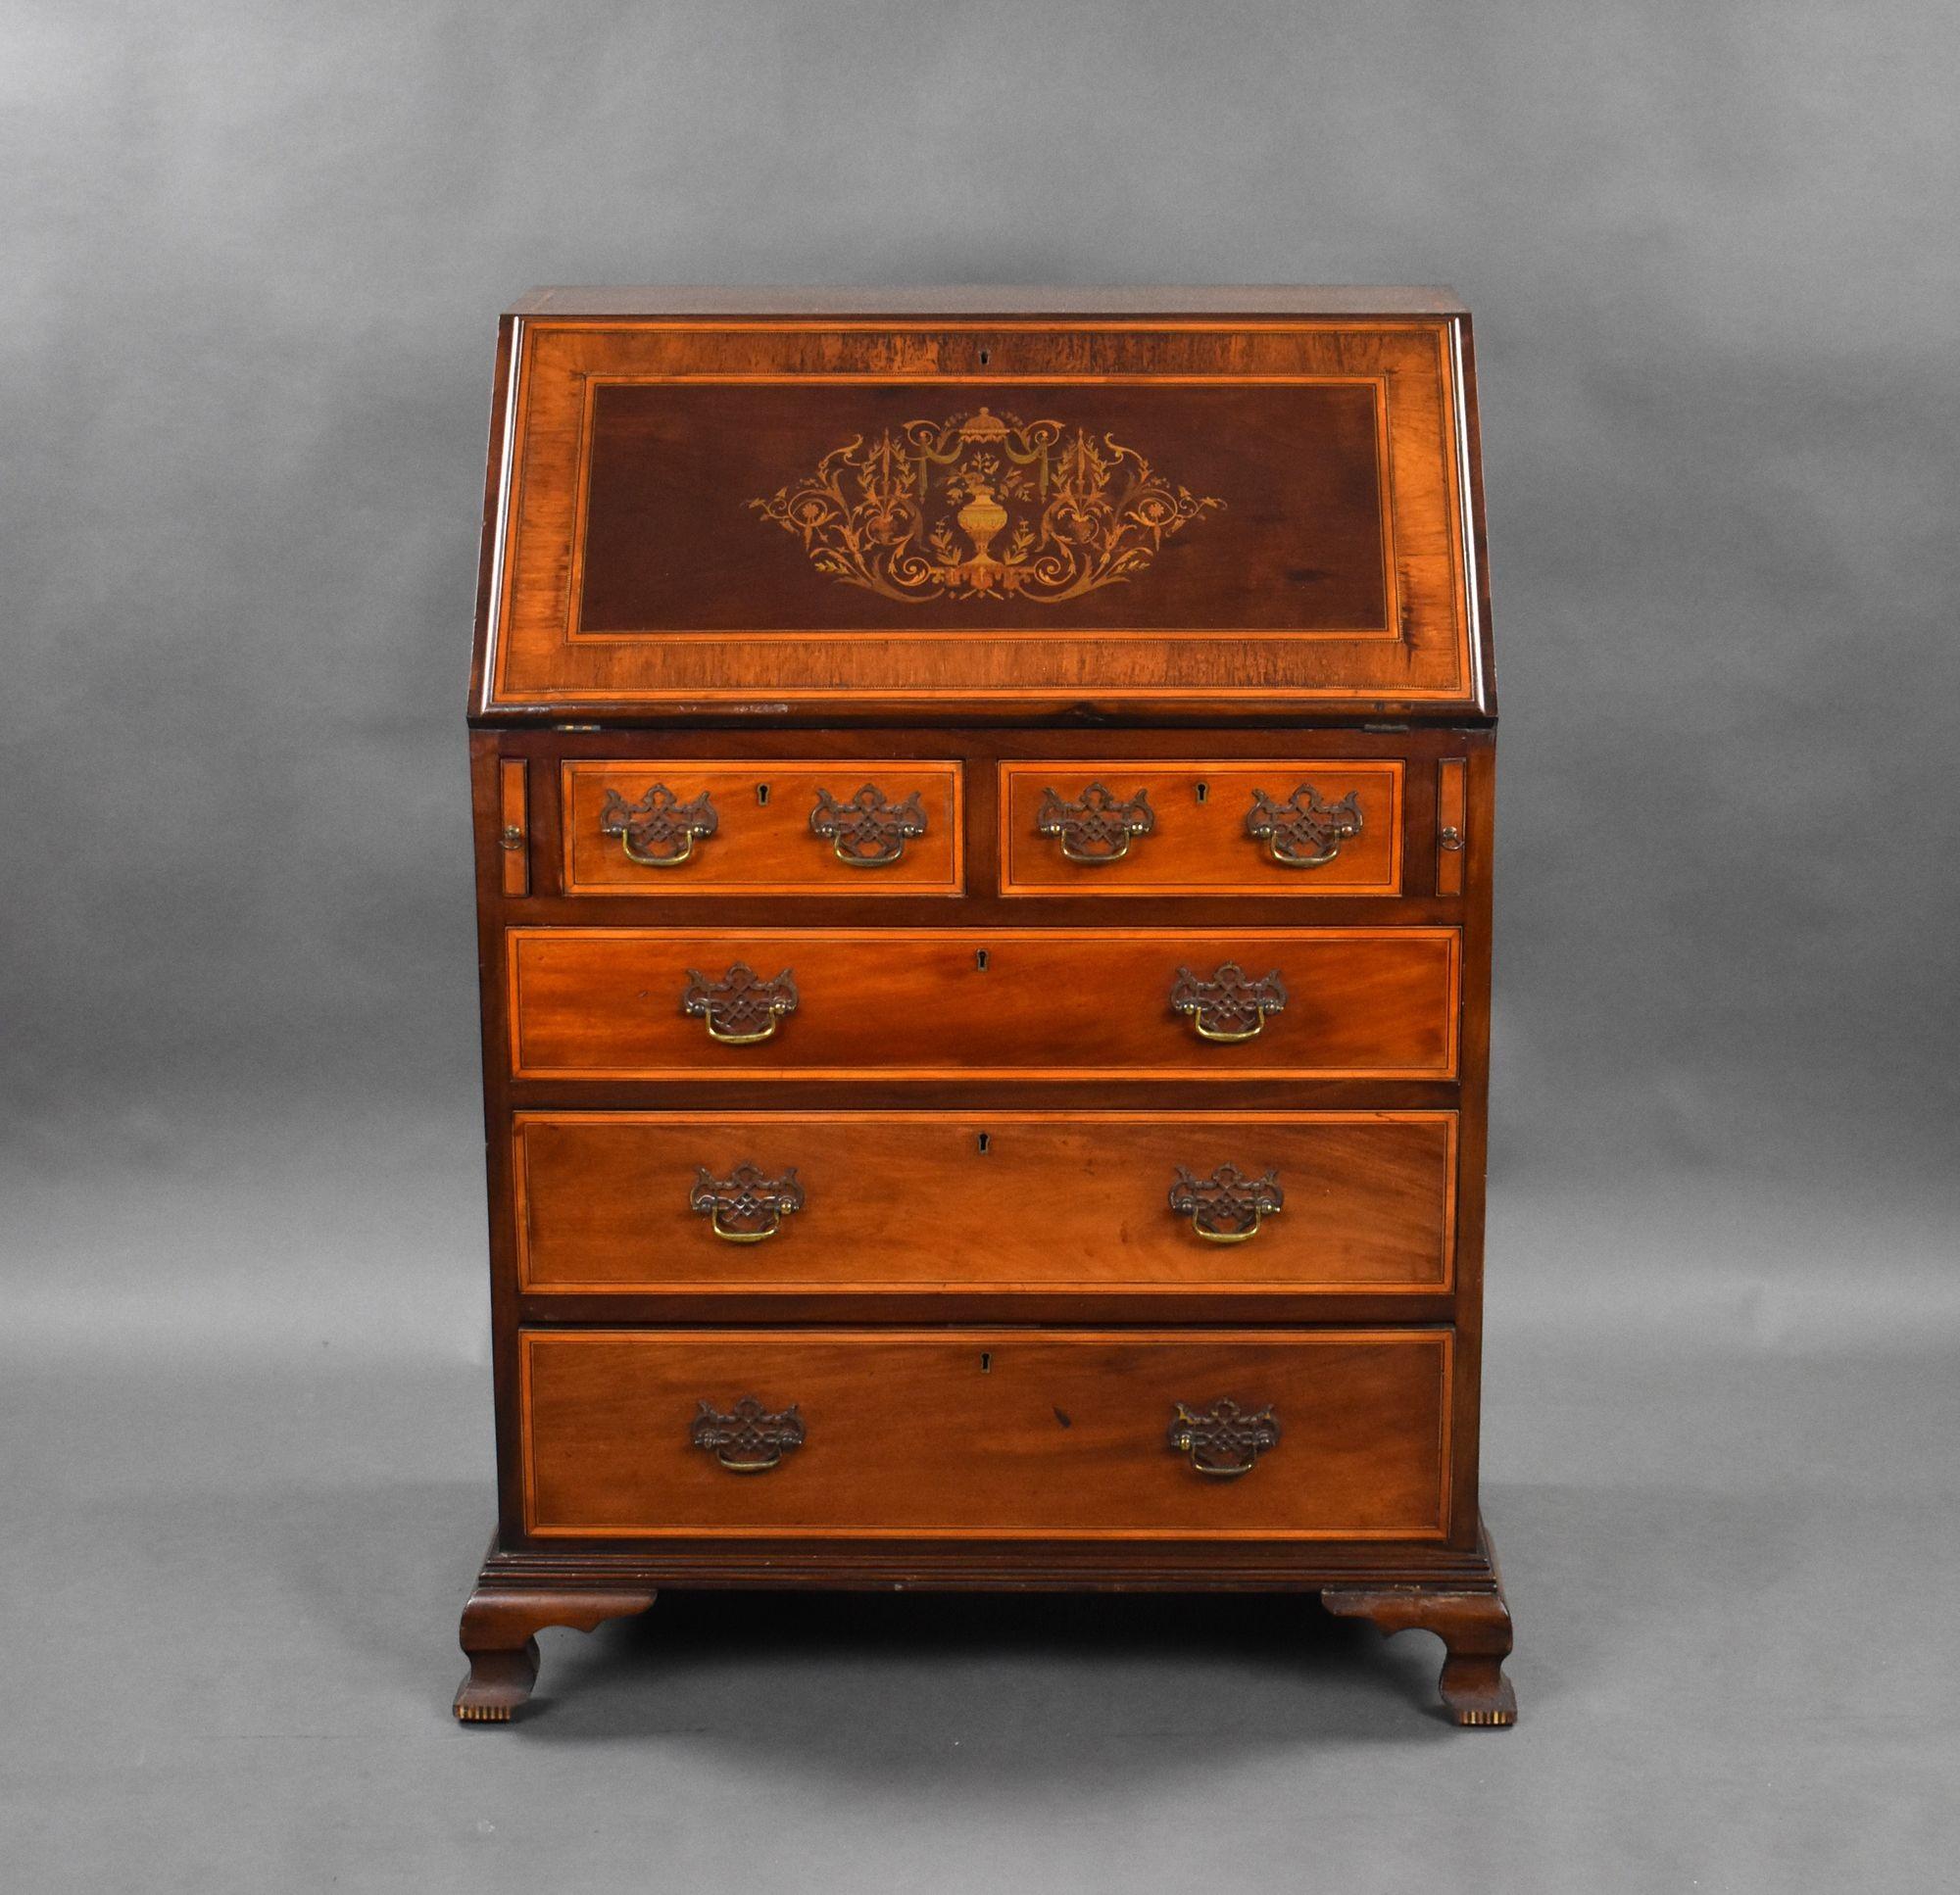 For sale is a good quality Edwardian marquetry bureau, having a cross banded fall, opening to a fully fitted interior consisting of pigoen holes, drawers and a central cupboard. The bureau also has an arrangement of four graduated drawers and stands